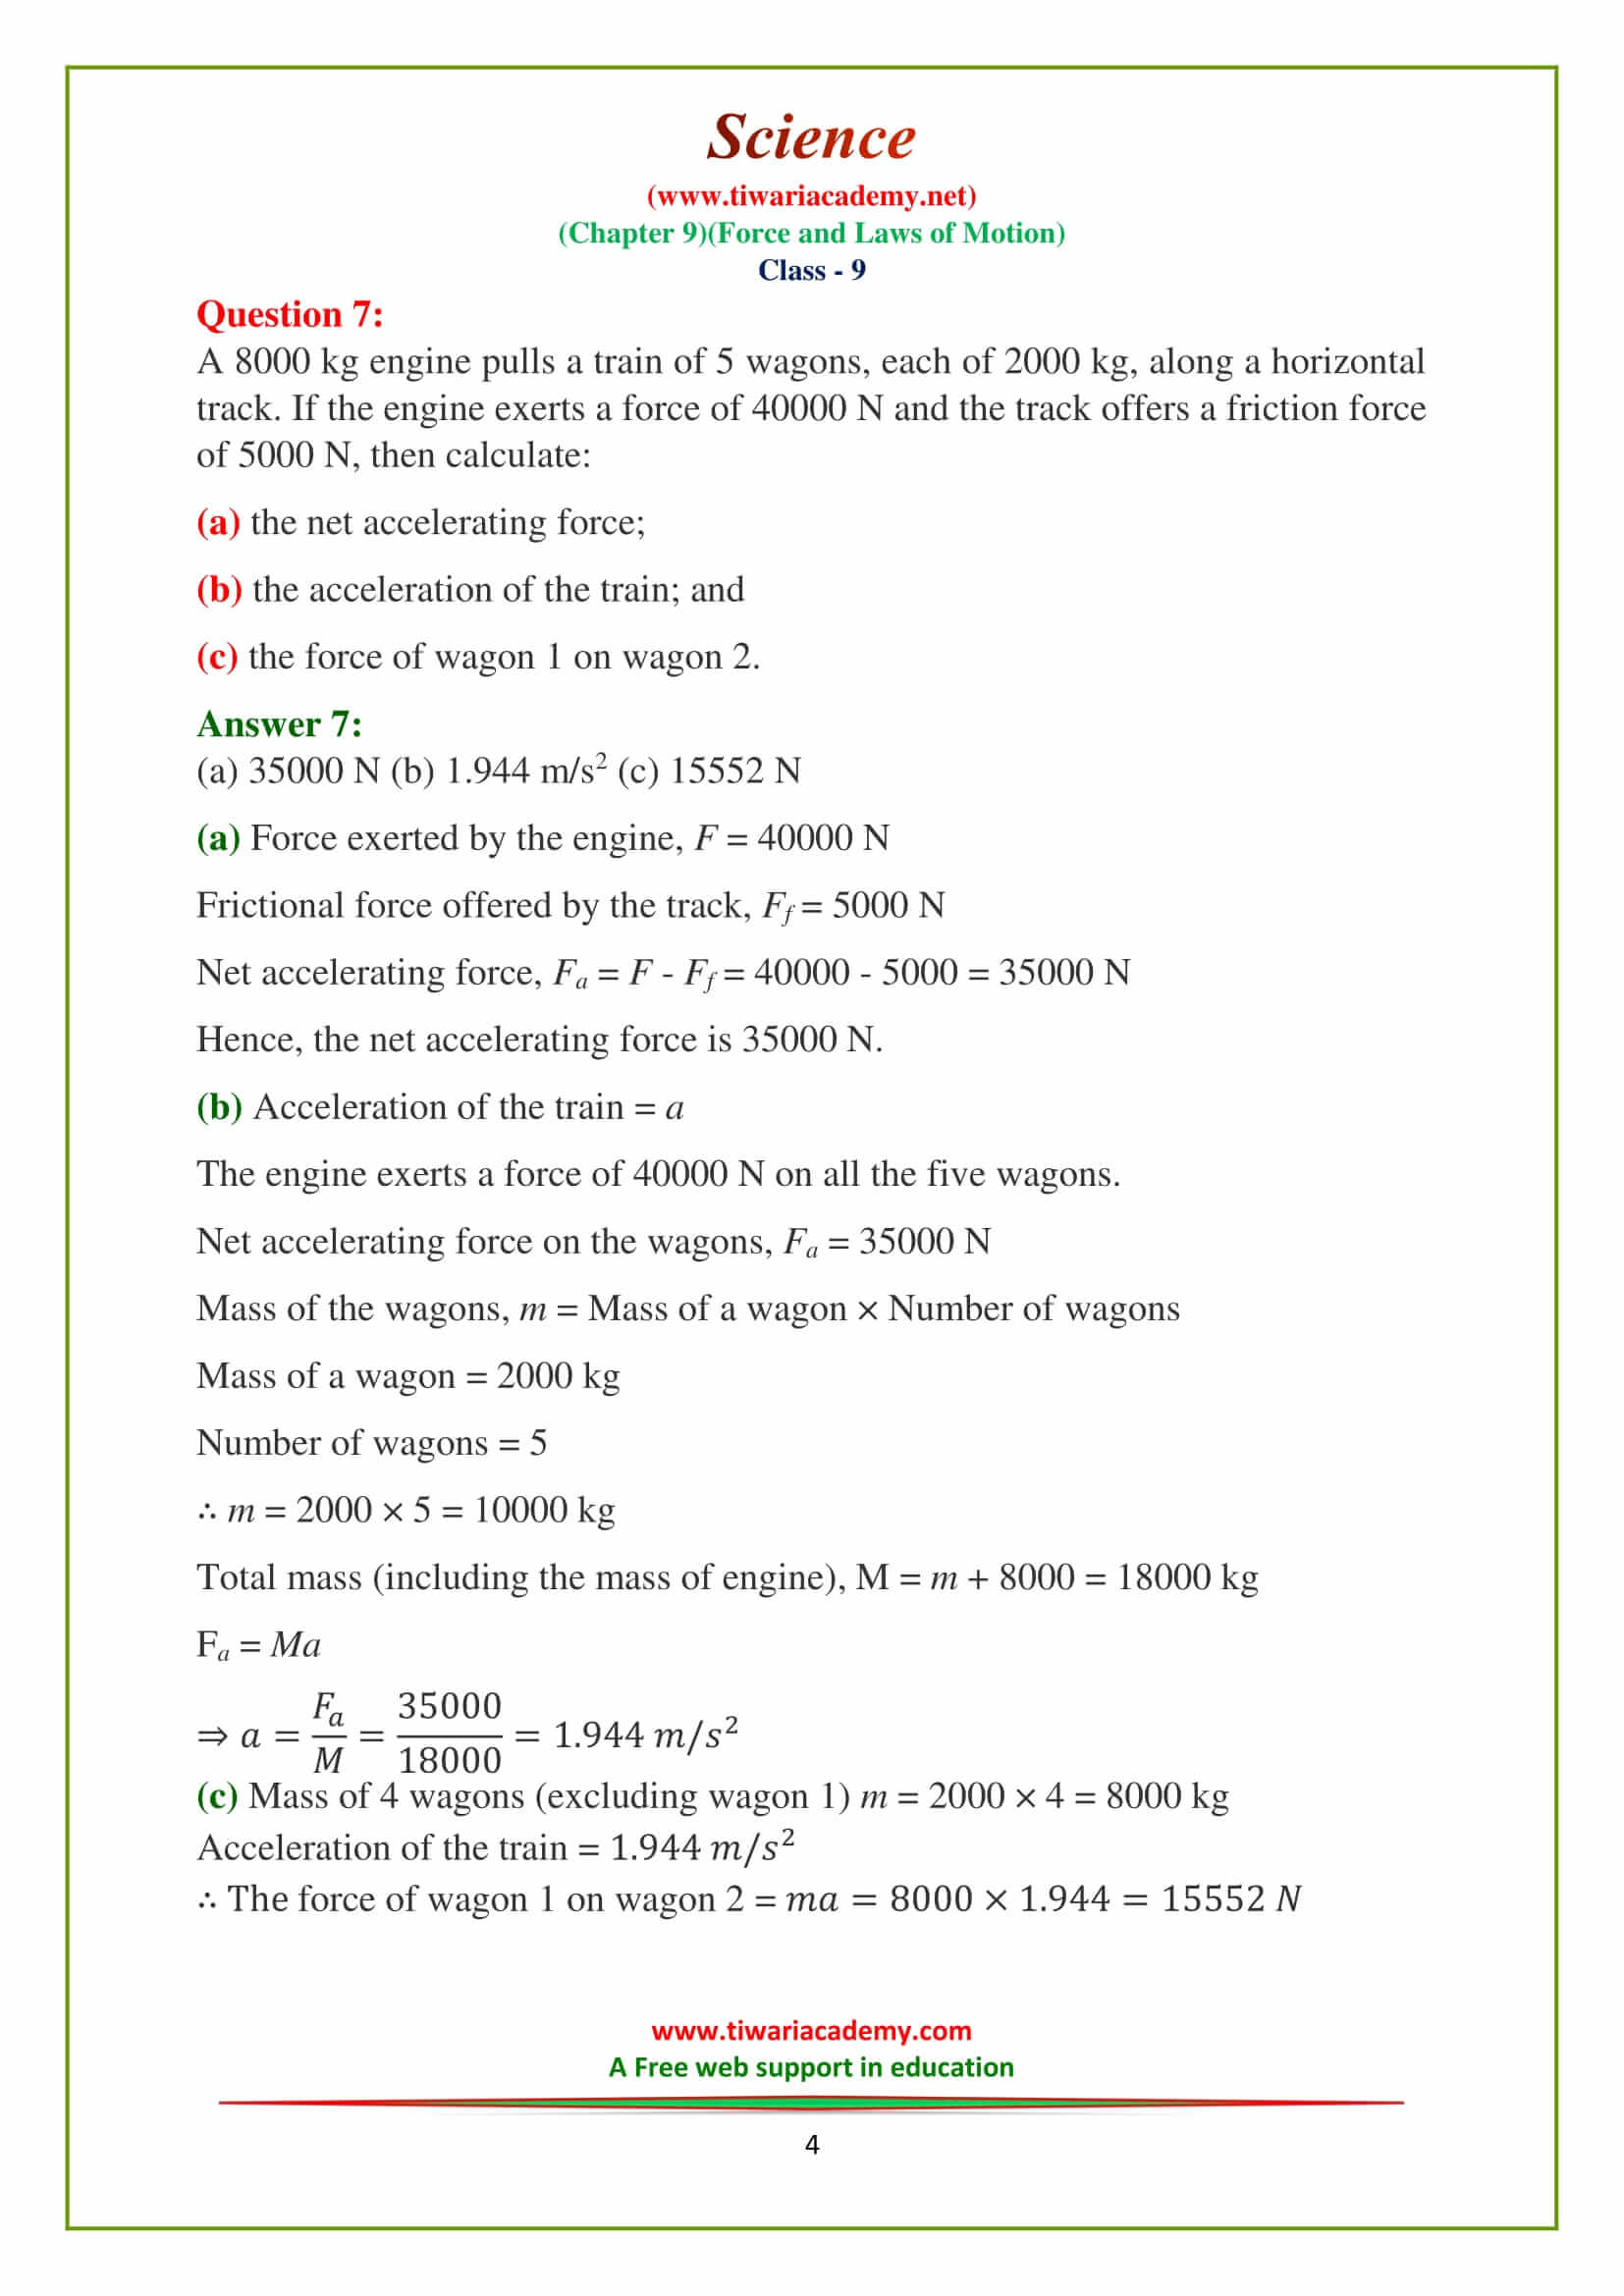 9 Science Chapter 9 force and laws of motion Exercises questions for gujrat board